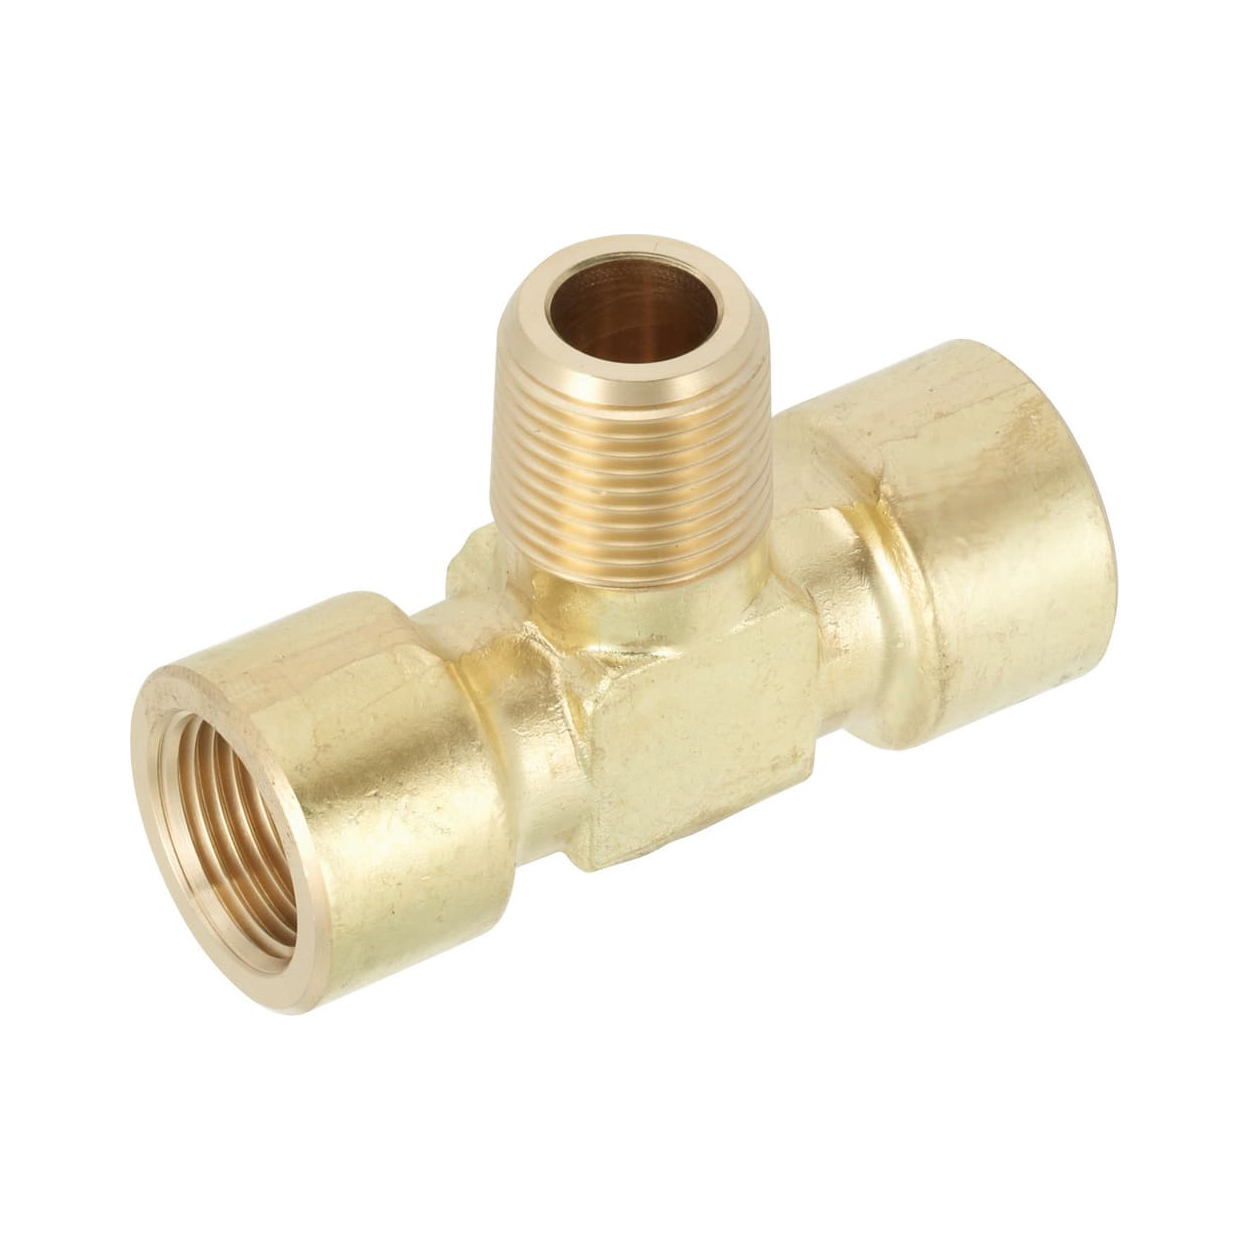 Brass Fittings for Steel Pipe / Tee / Threaded / Tapped SJSXT8A